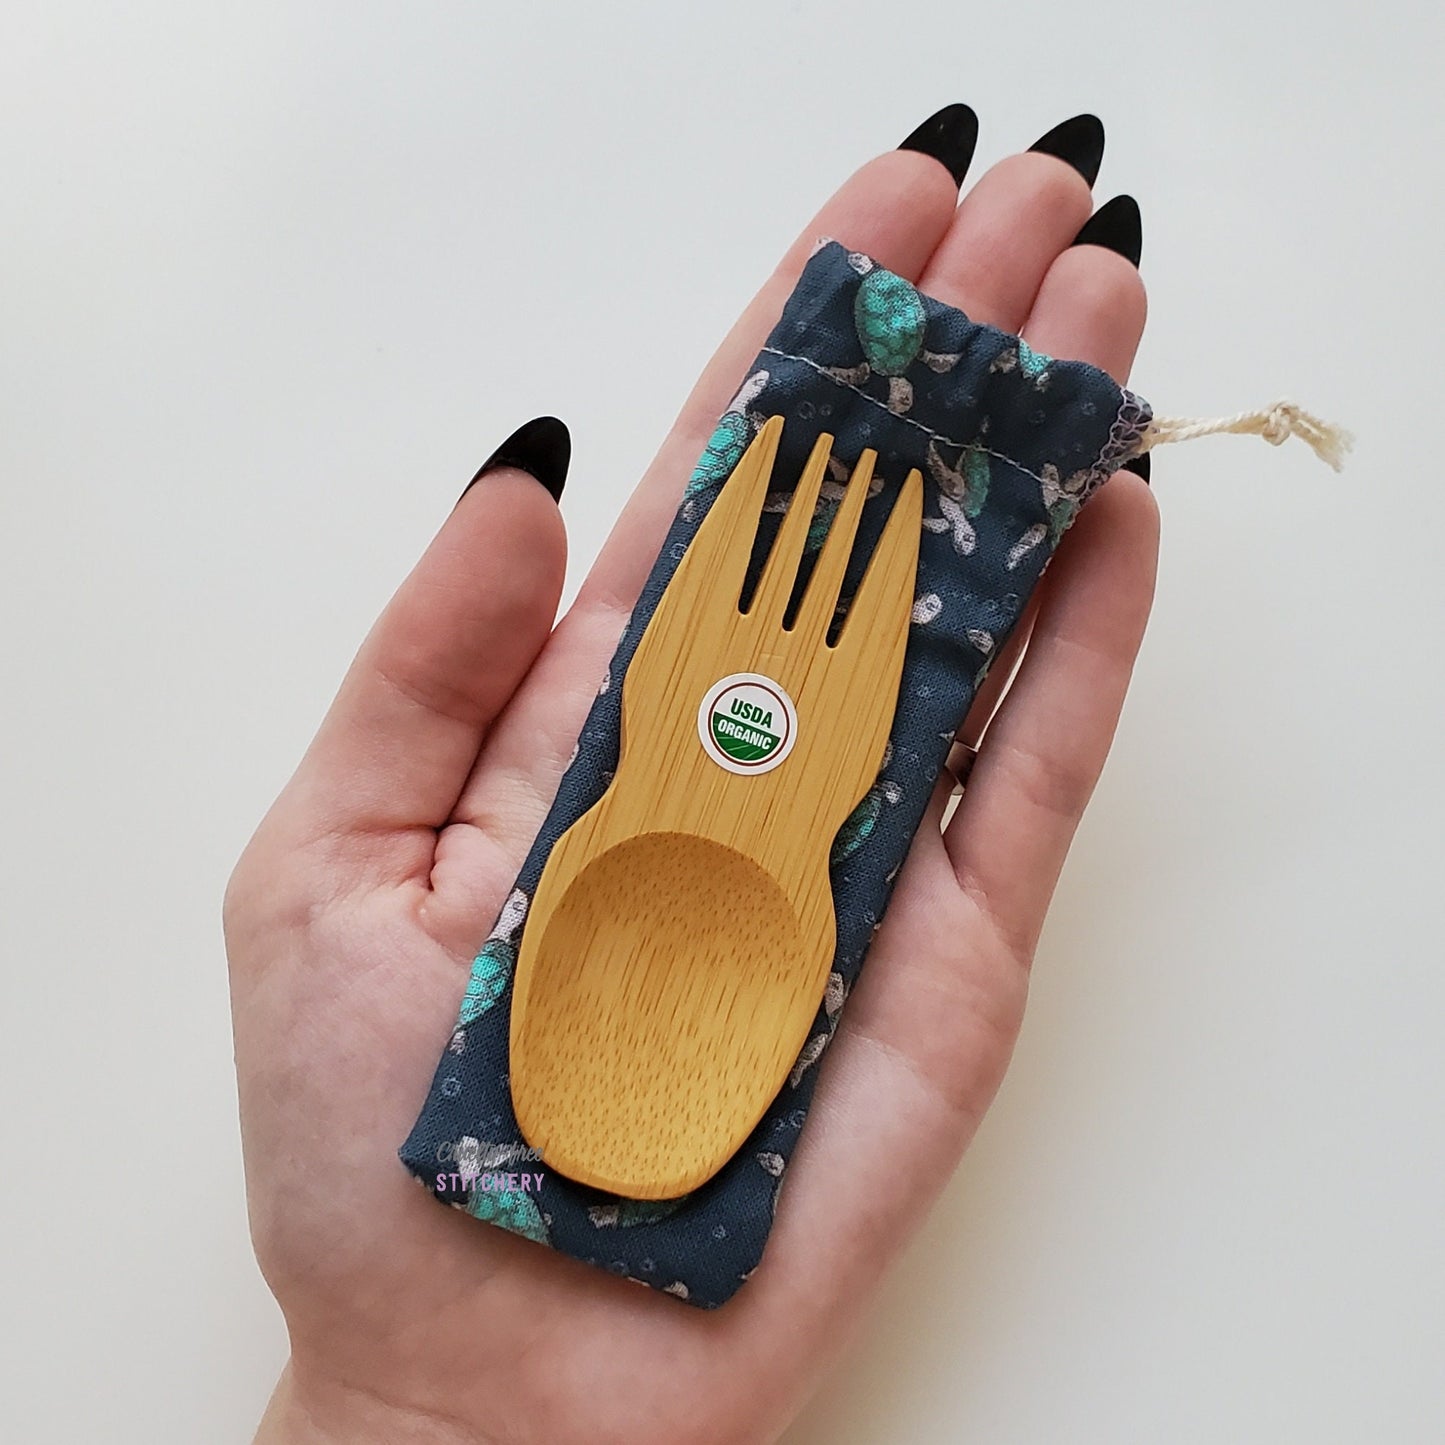 Reusable bamboo spork with pouch. Sea Turtle print fabric pouch with bamboo spork on top, laid on a hand for size reference. The spork is slightly longer than the fingers.